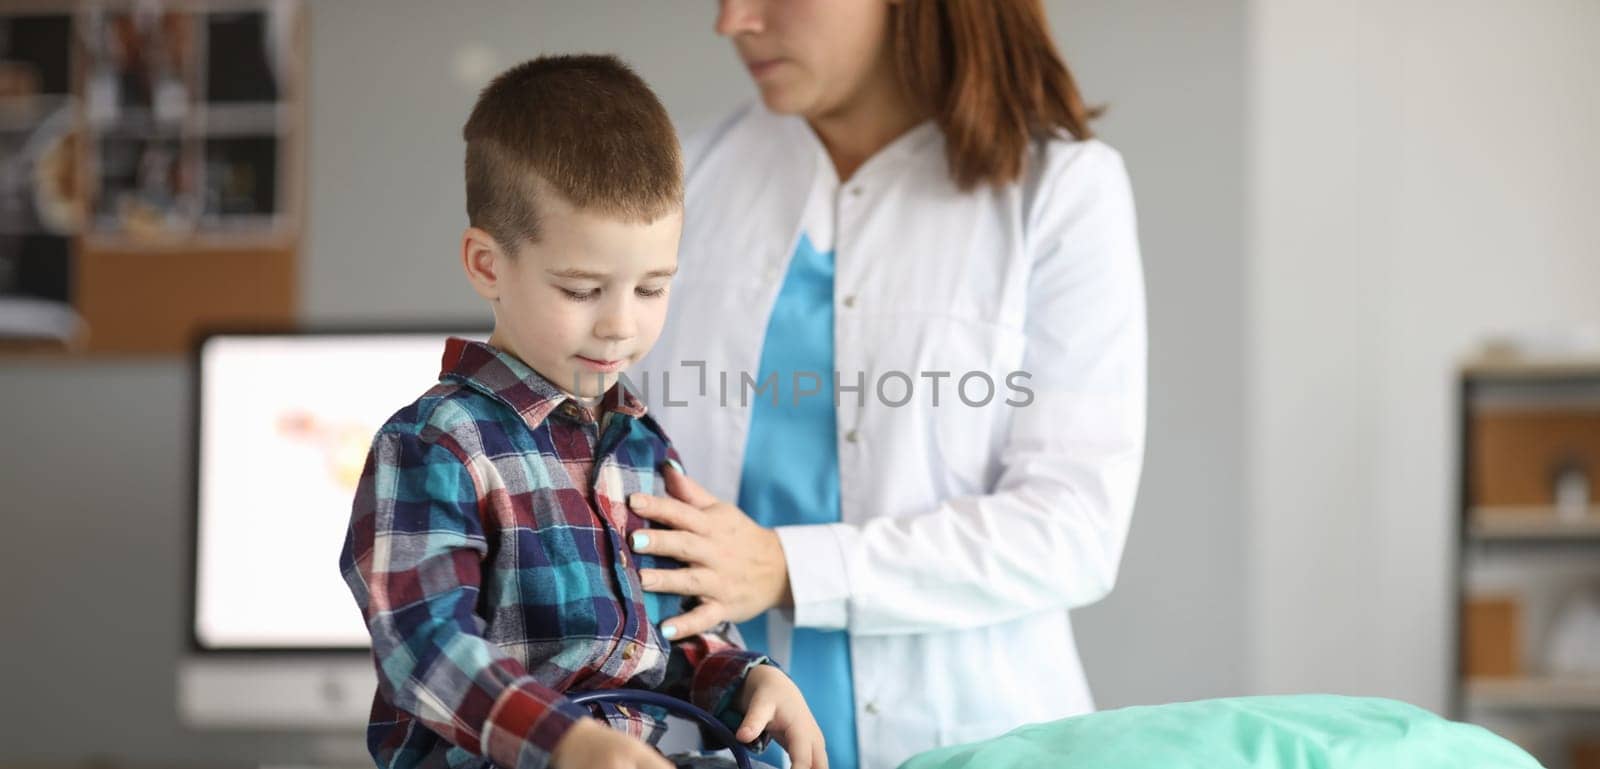 Portrait of child sitting in modern clinic office and looking down in gloomy mood. Female pediatrician standing near patient and examining boy. Medicine and healthcare concept